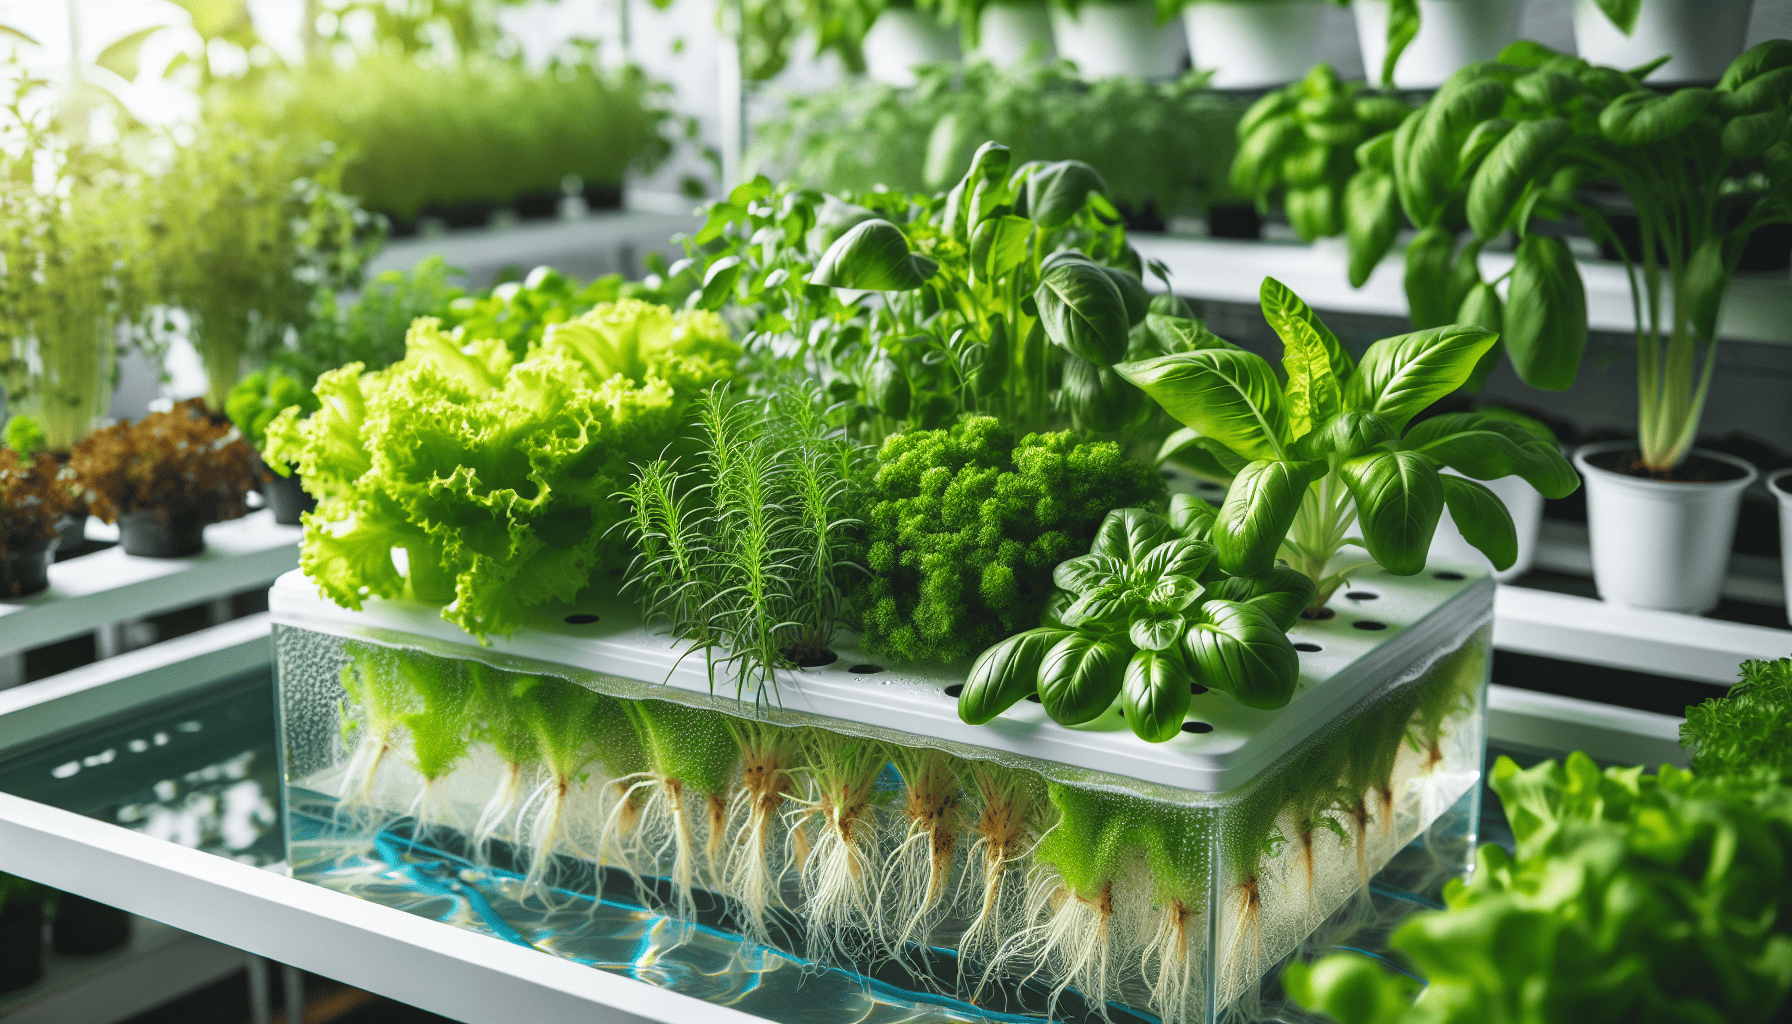 Hydroponic plants growing in nutrient-rich water solution